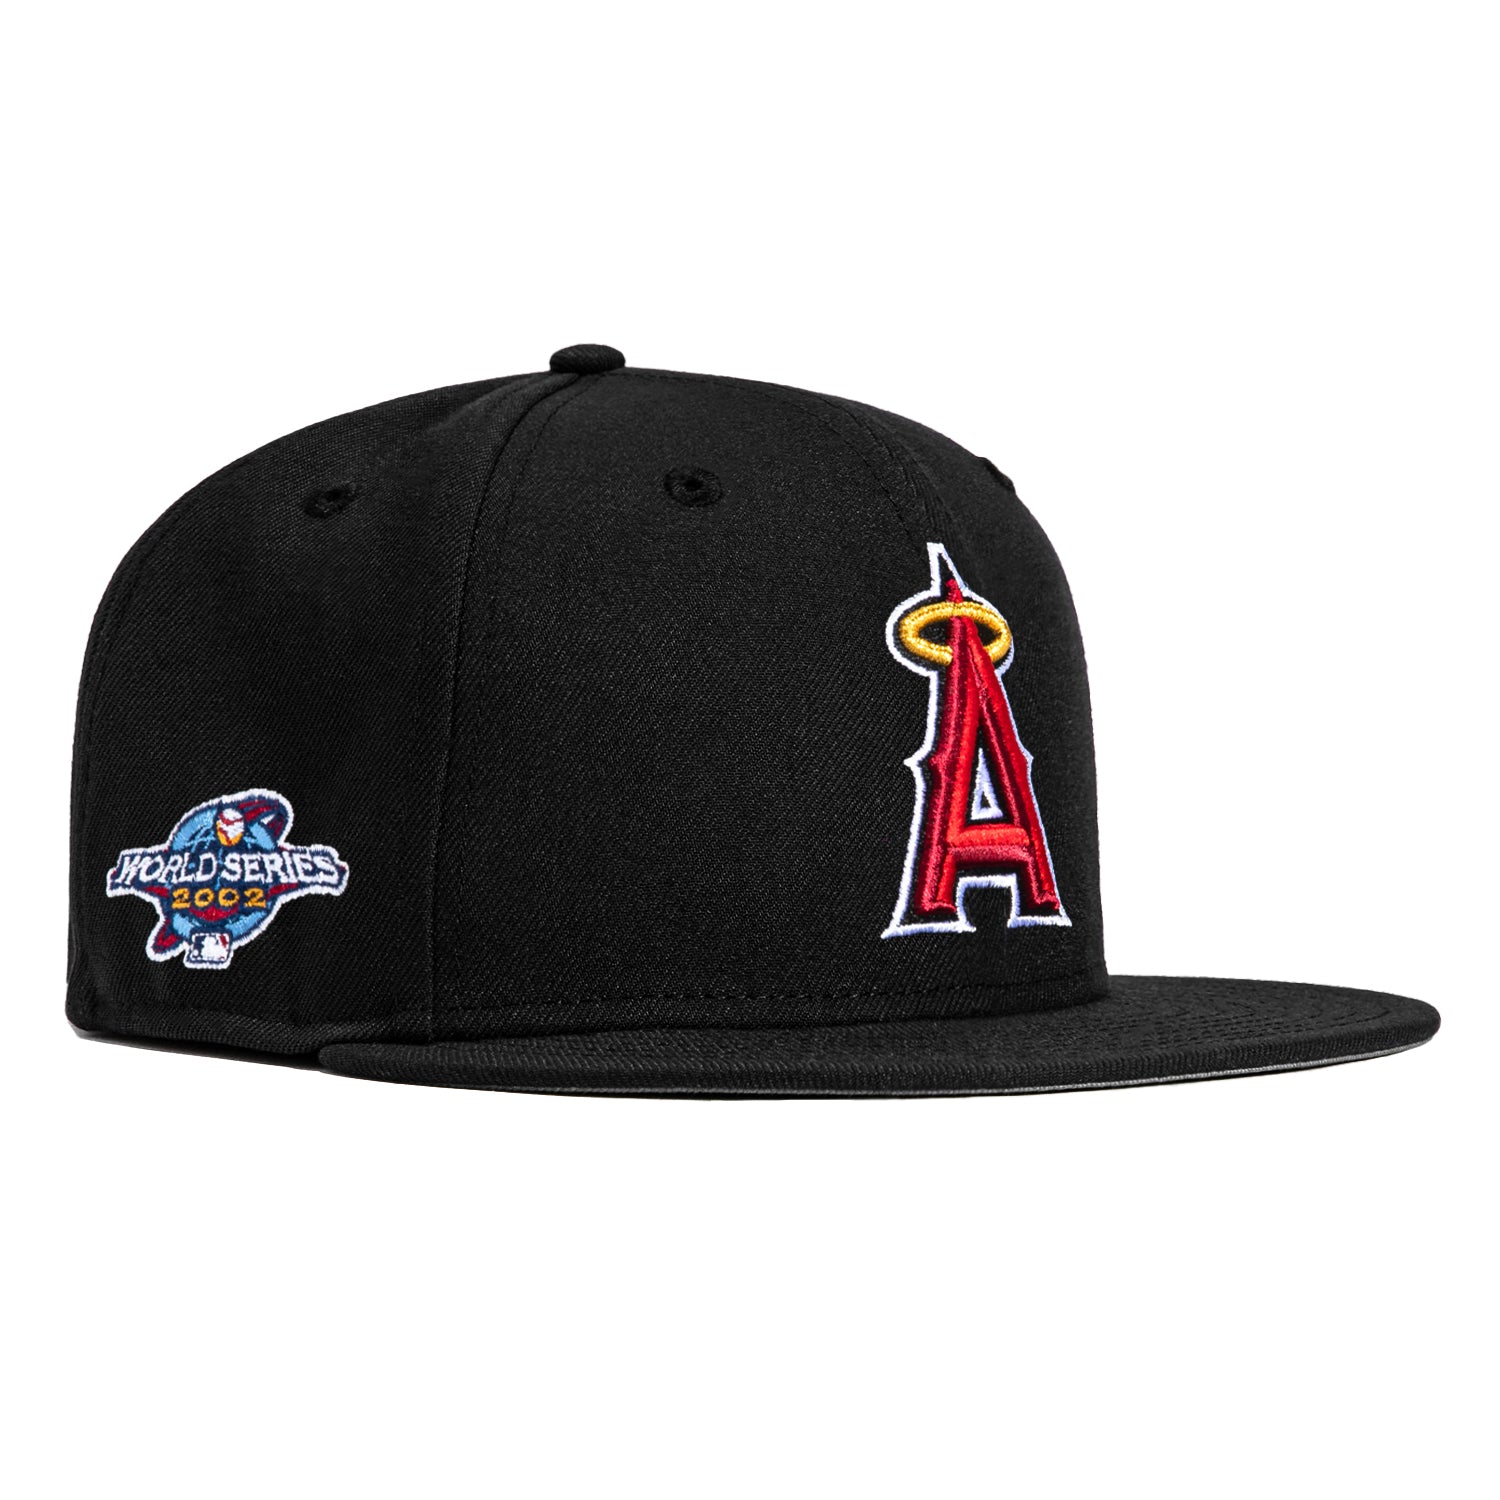 MLB, Accessories, Vintage 202 Los Angeles Angels World Series Champs Hat